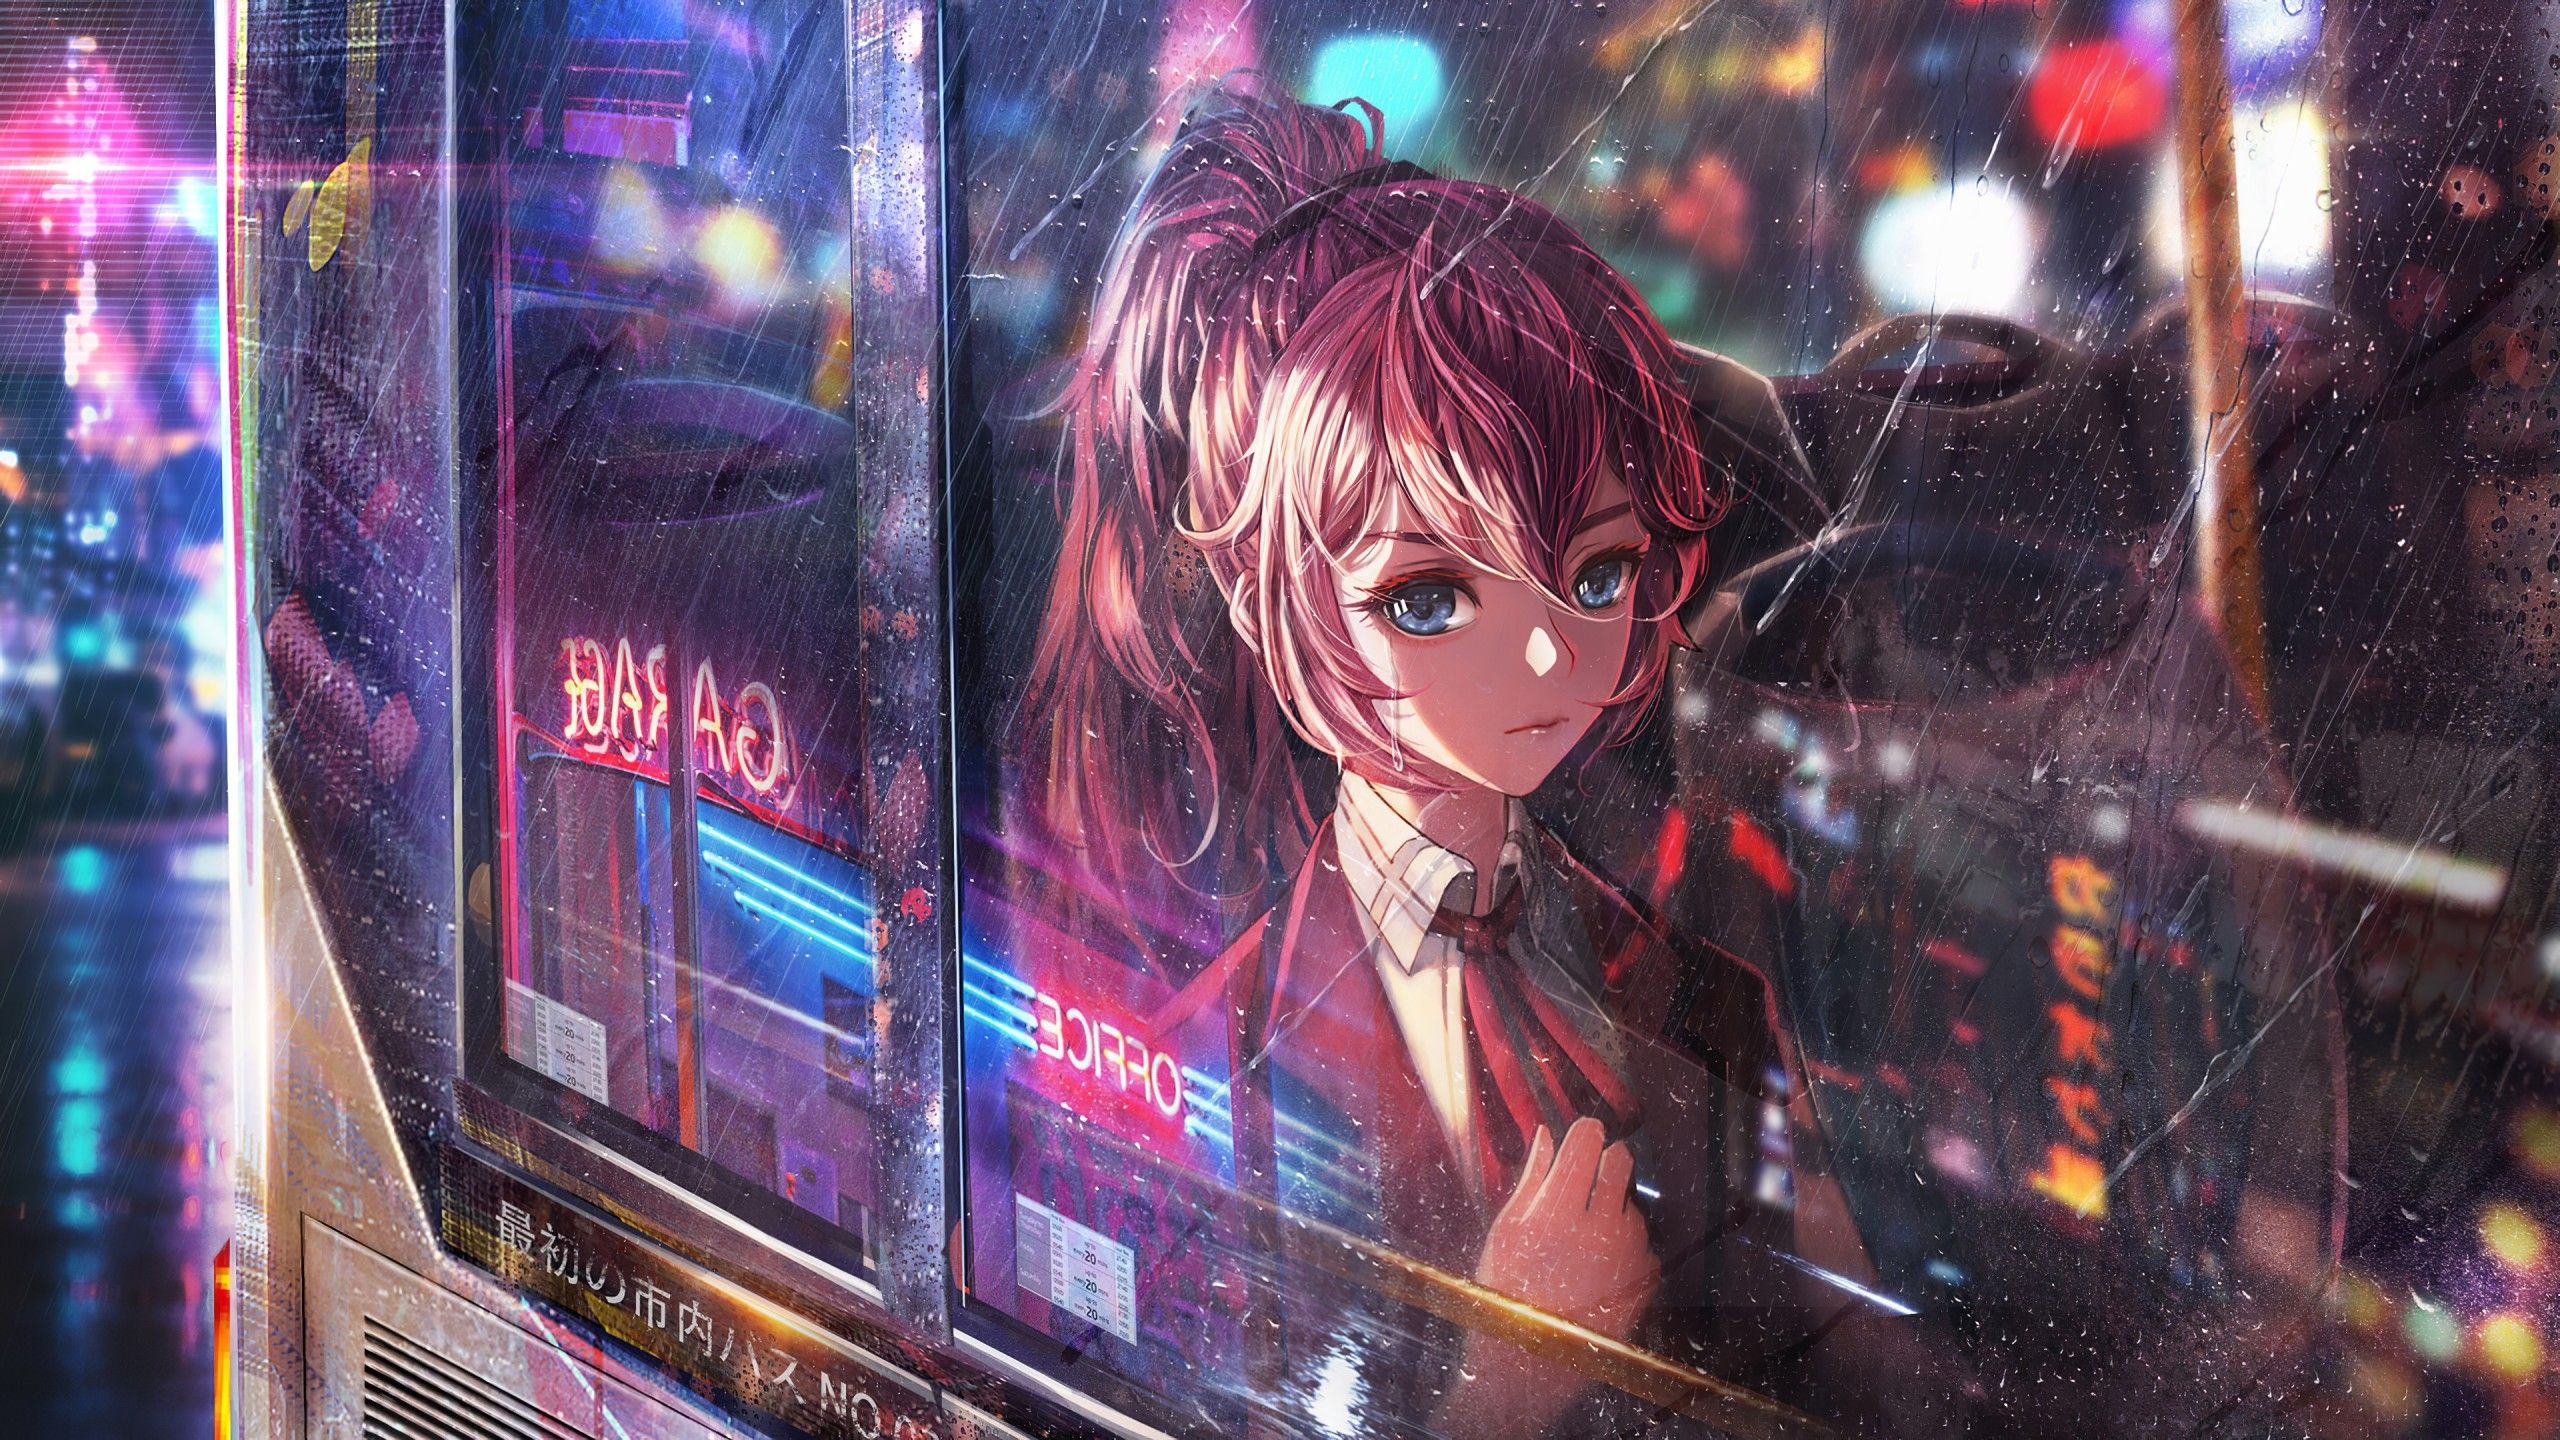 Anime Neon City Wallpaper & Background Beautiful Best Available For Download Anime Neon City Photo Free On Zicxa.com Image